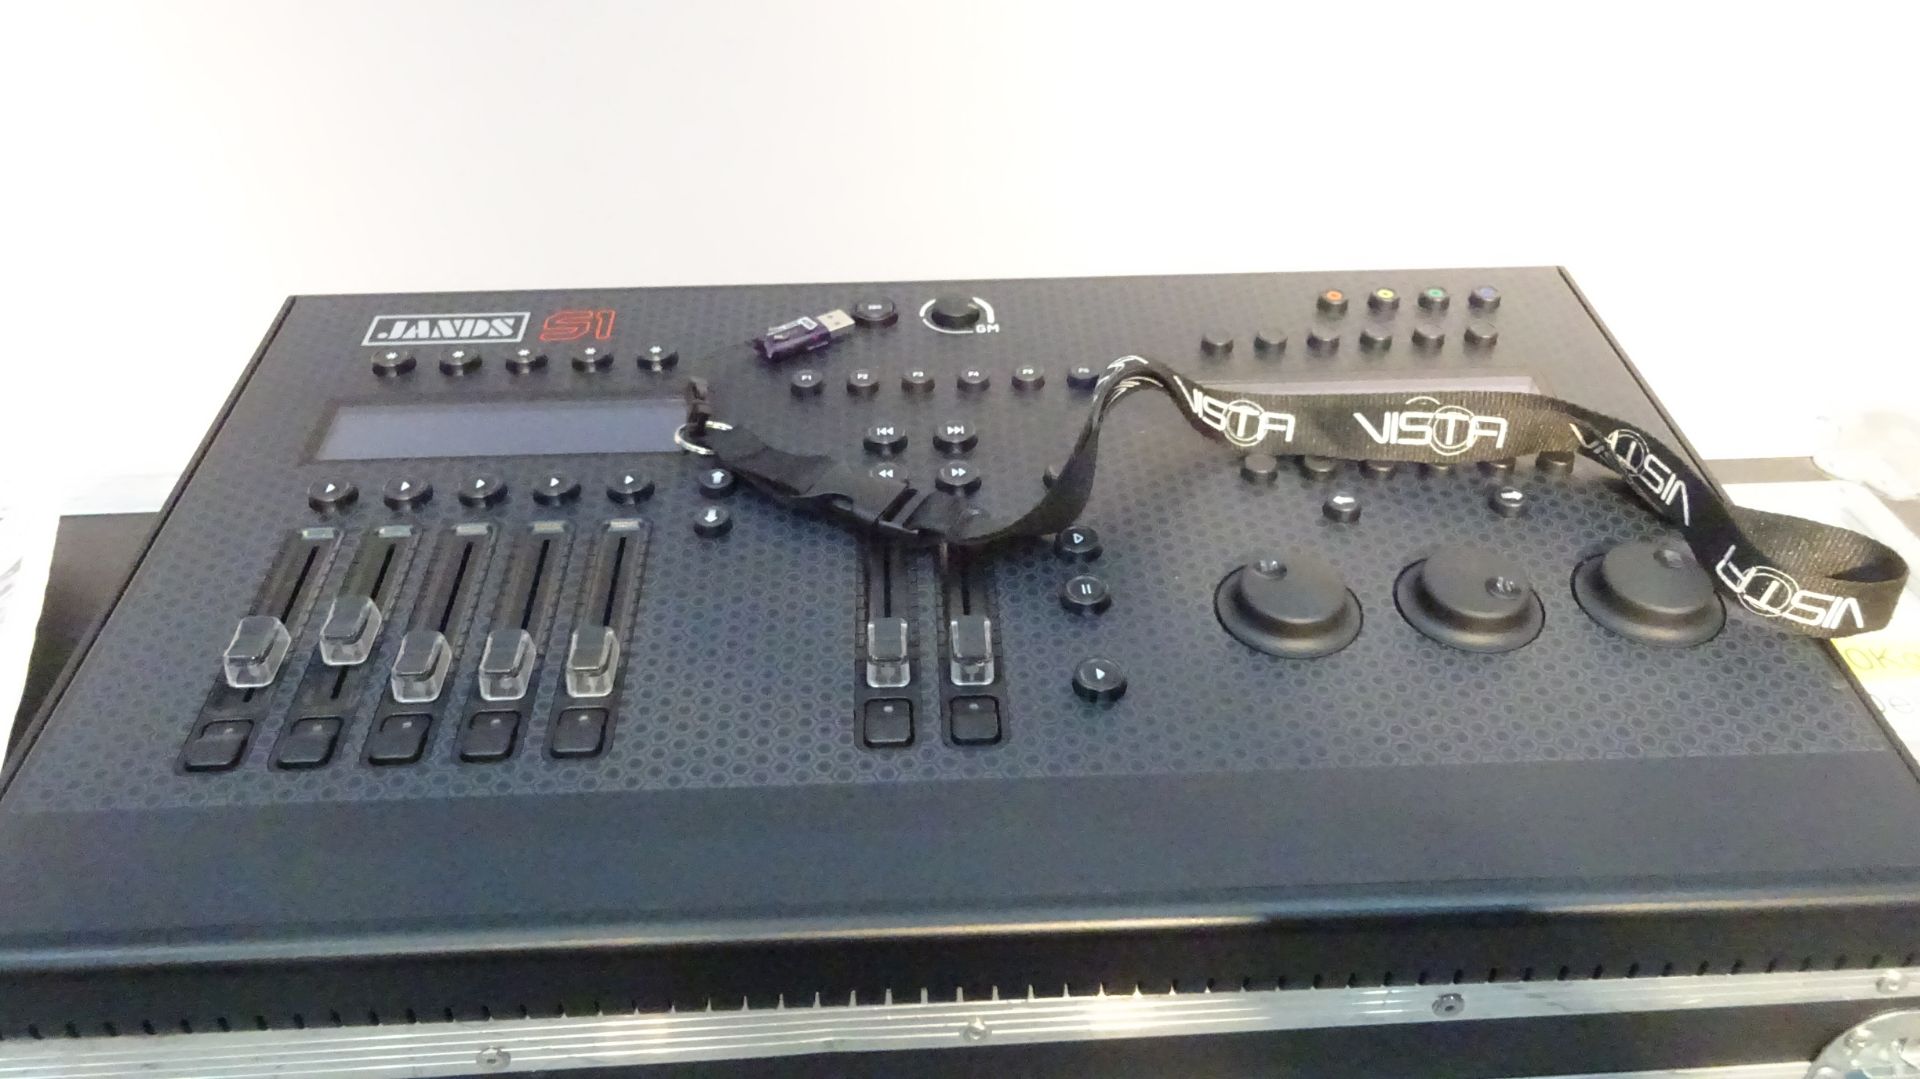 Jansvista S1 Lighting Desk 2 x 5 pin DMX Outputs Jansvista Software Dongal to control moving